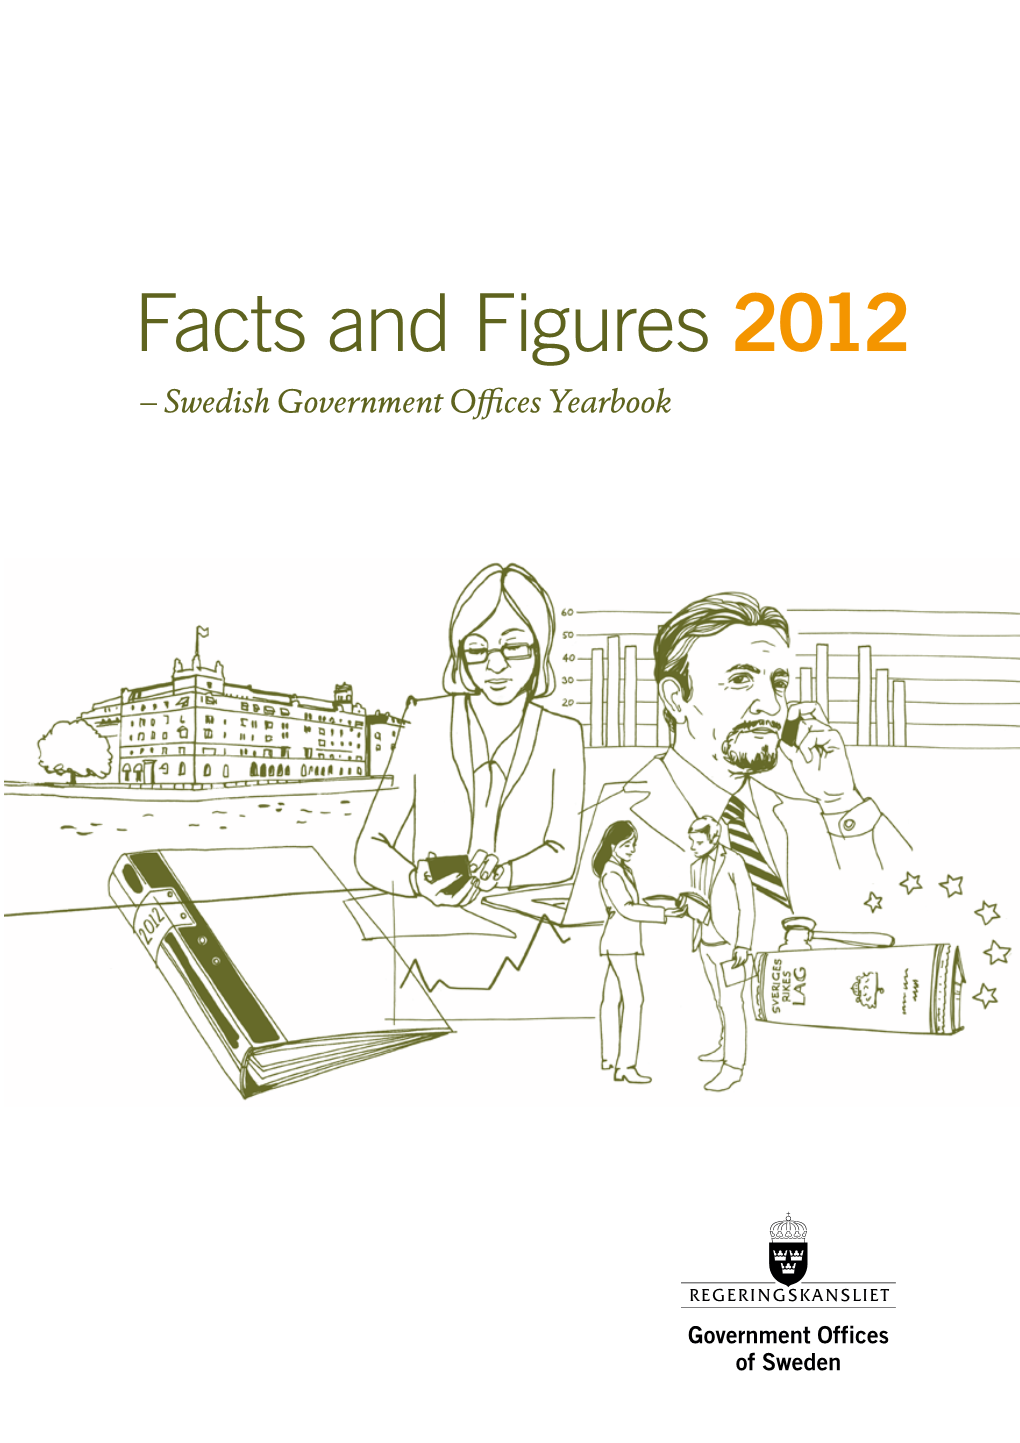 Facts & Figures Swedish Government Offices Yearbook 2012